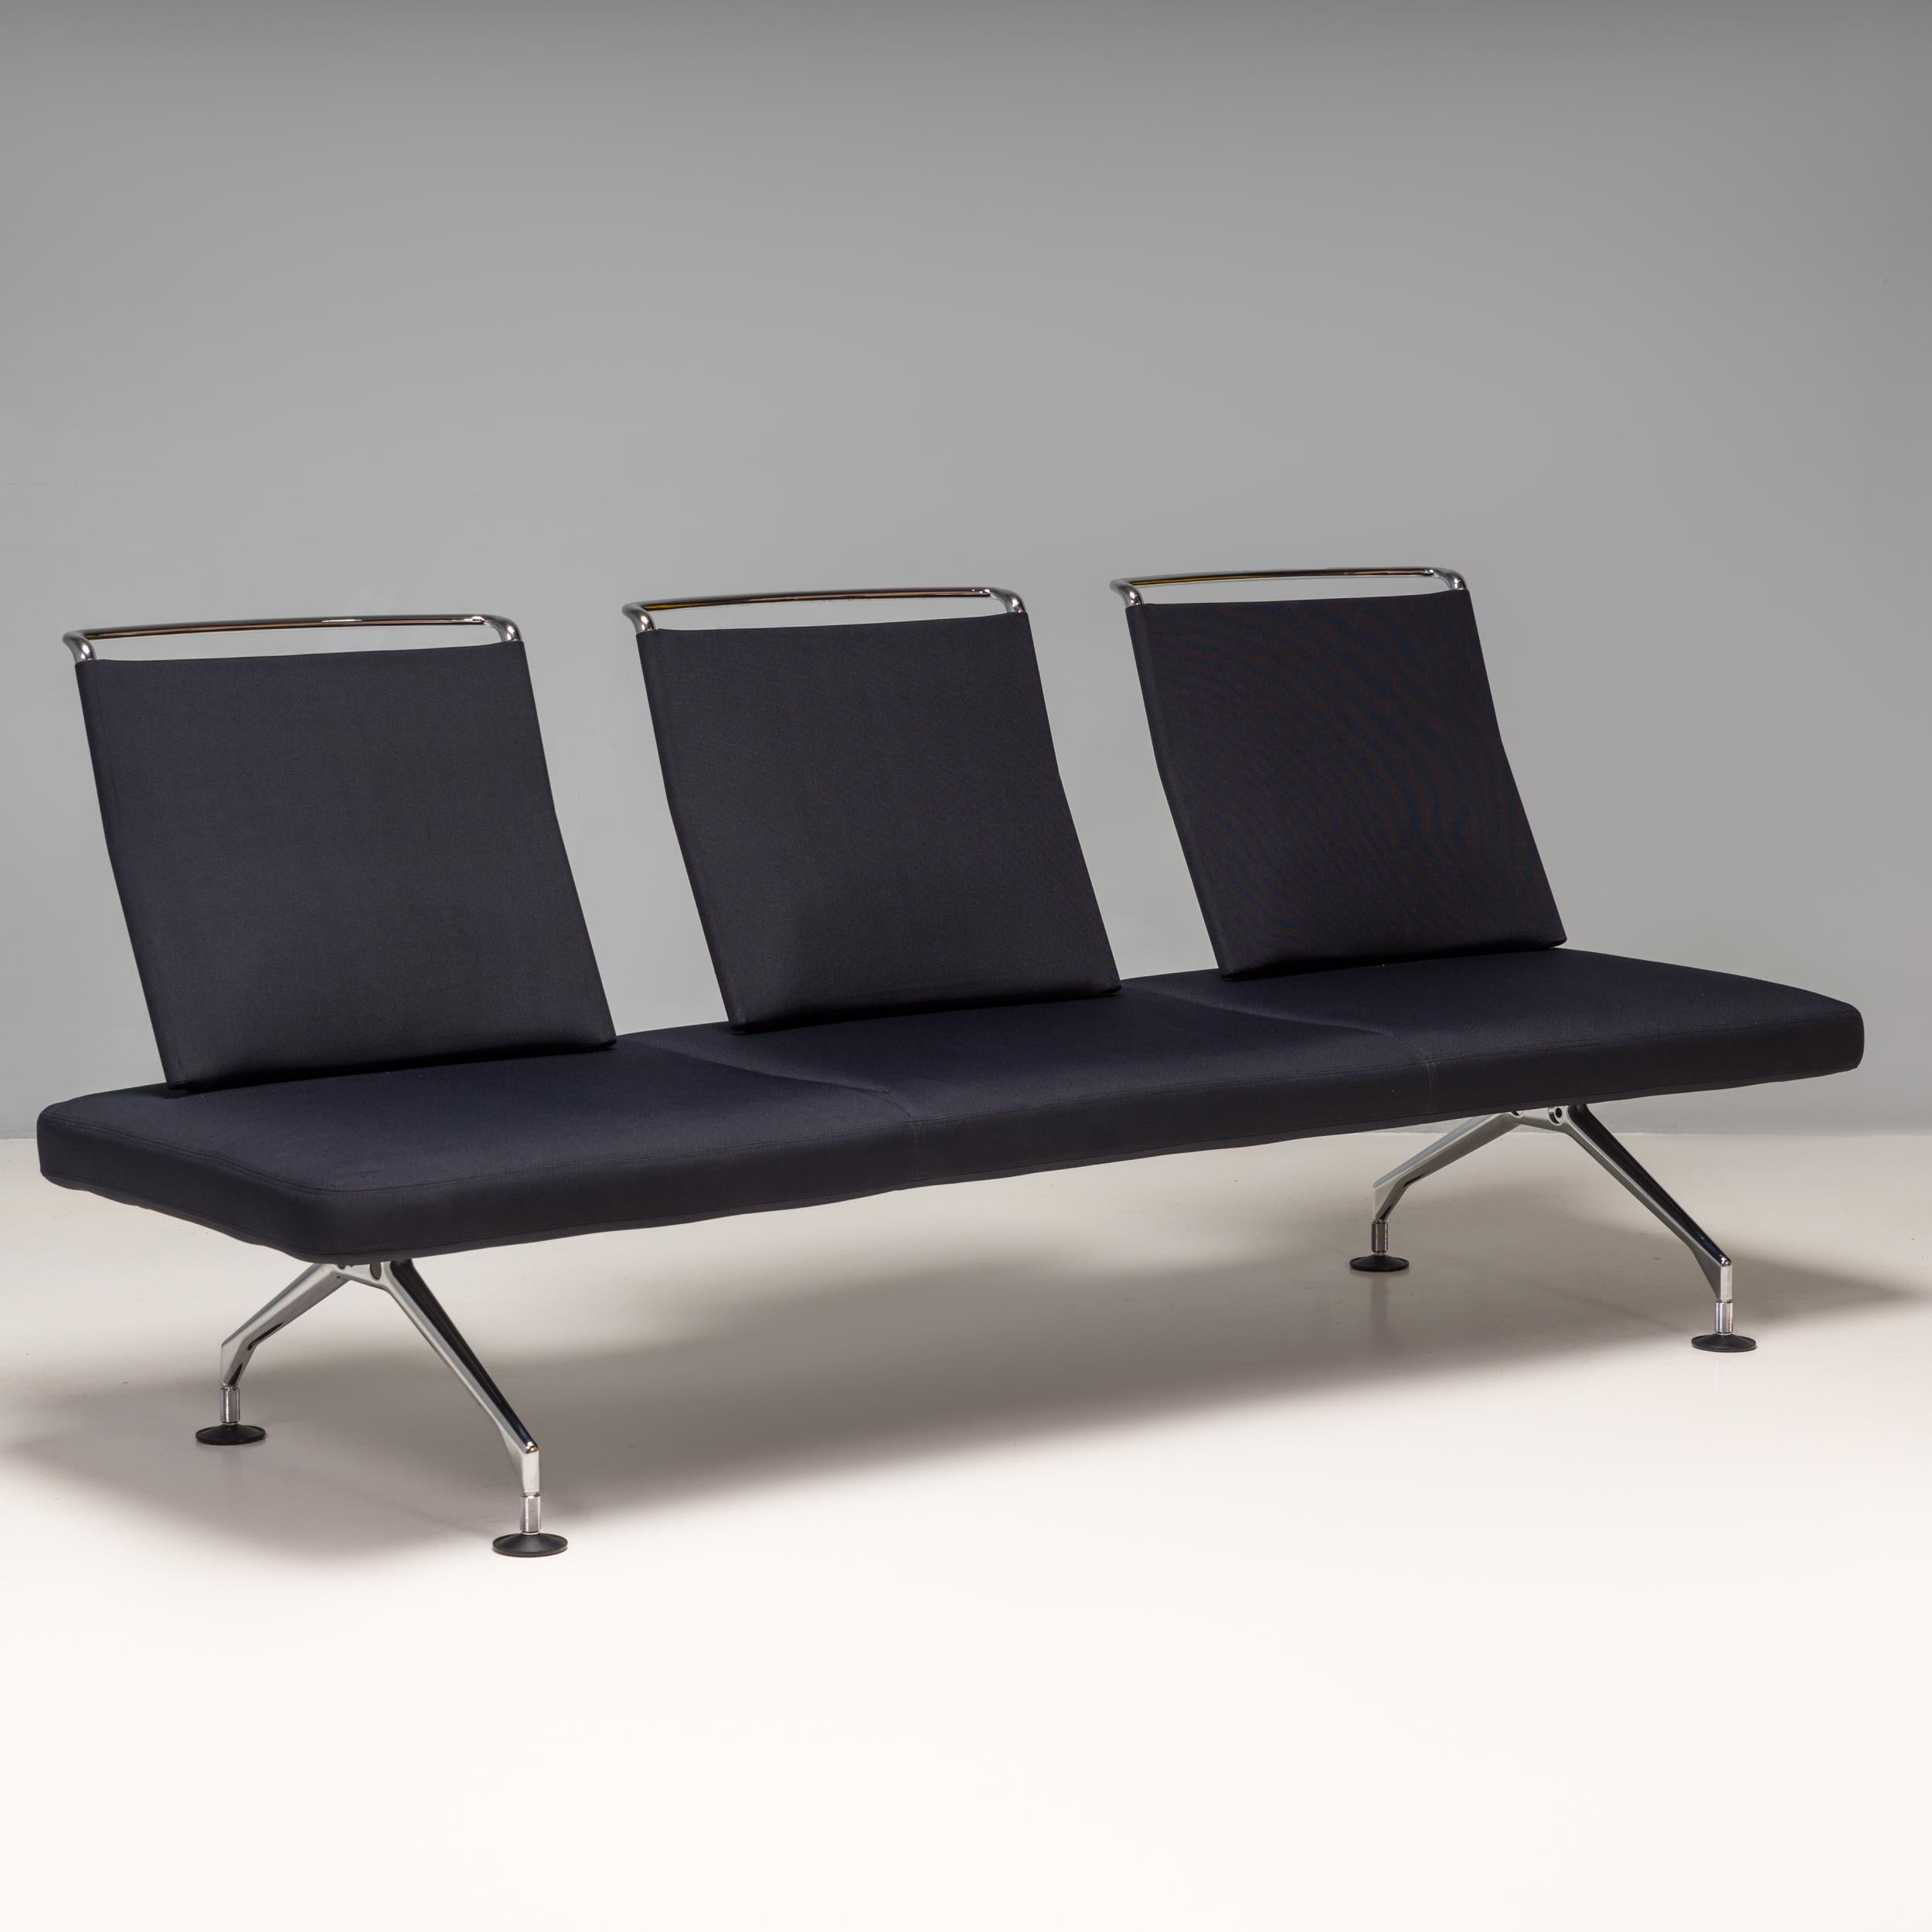 Designed by Antonio Citterio for Vitra the Area sofa has a sleek, postmodern aesthetic. This model was produced in 2003.

Featuring a single flat seat cushion with no arms, the sofa sits on angular die-cast aluminium legs in a chrome finish, with